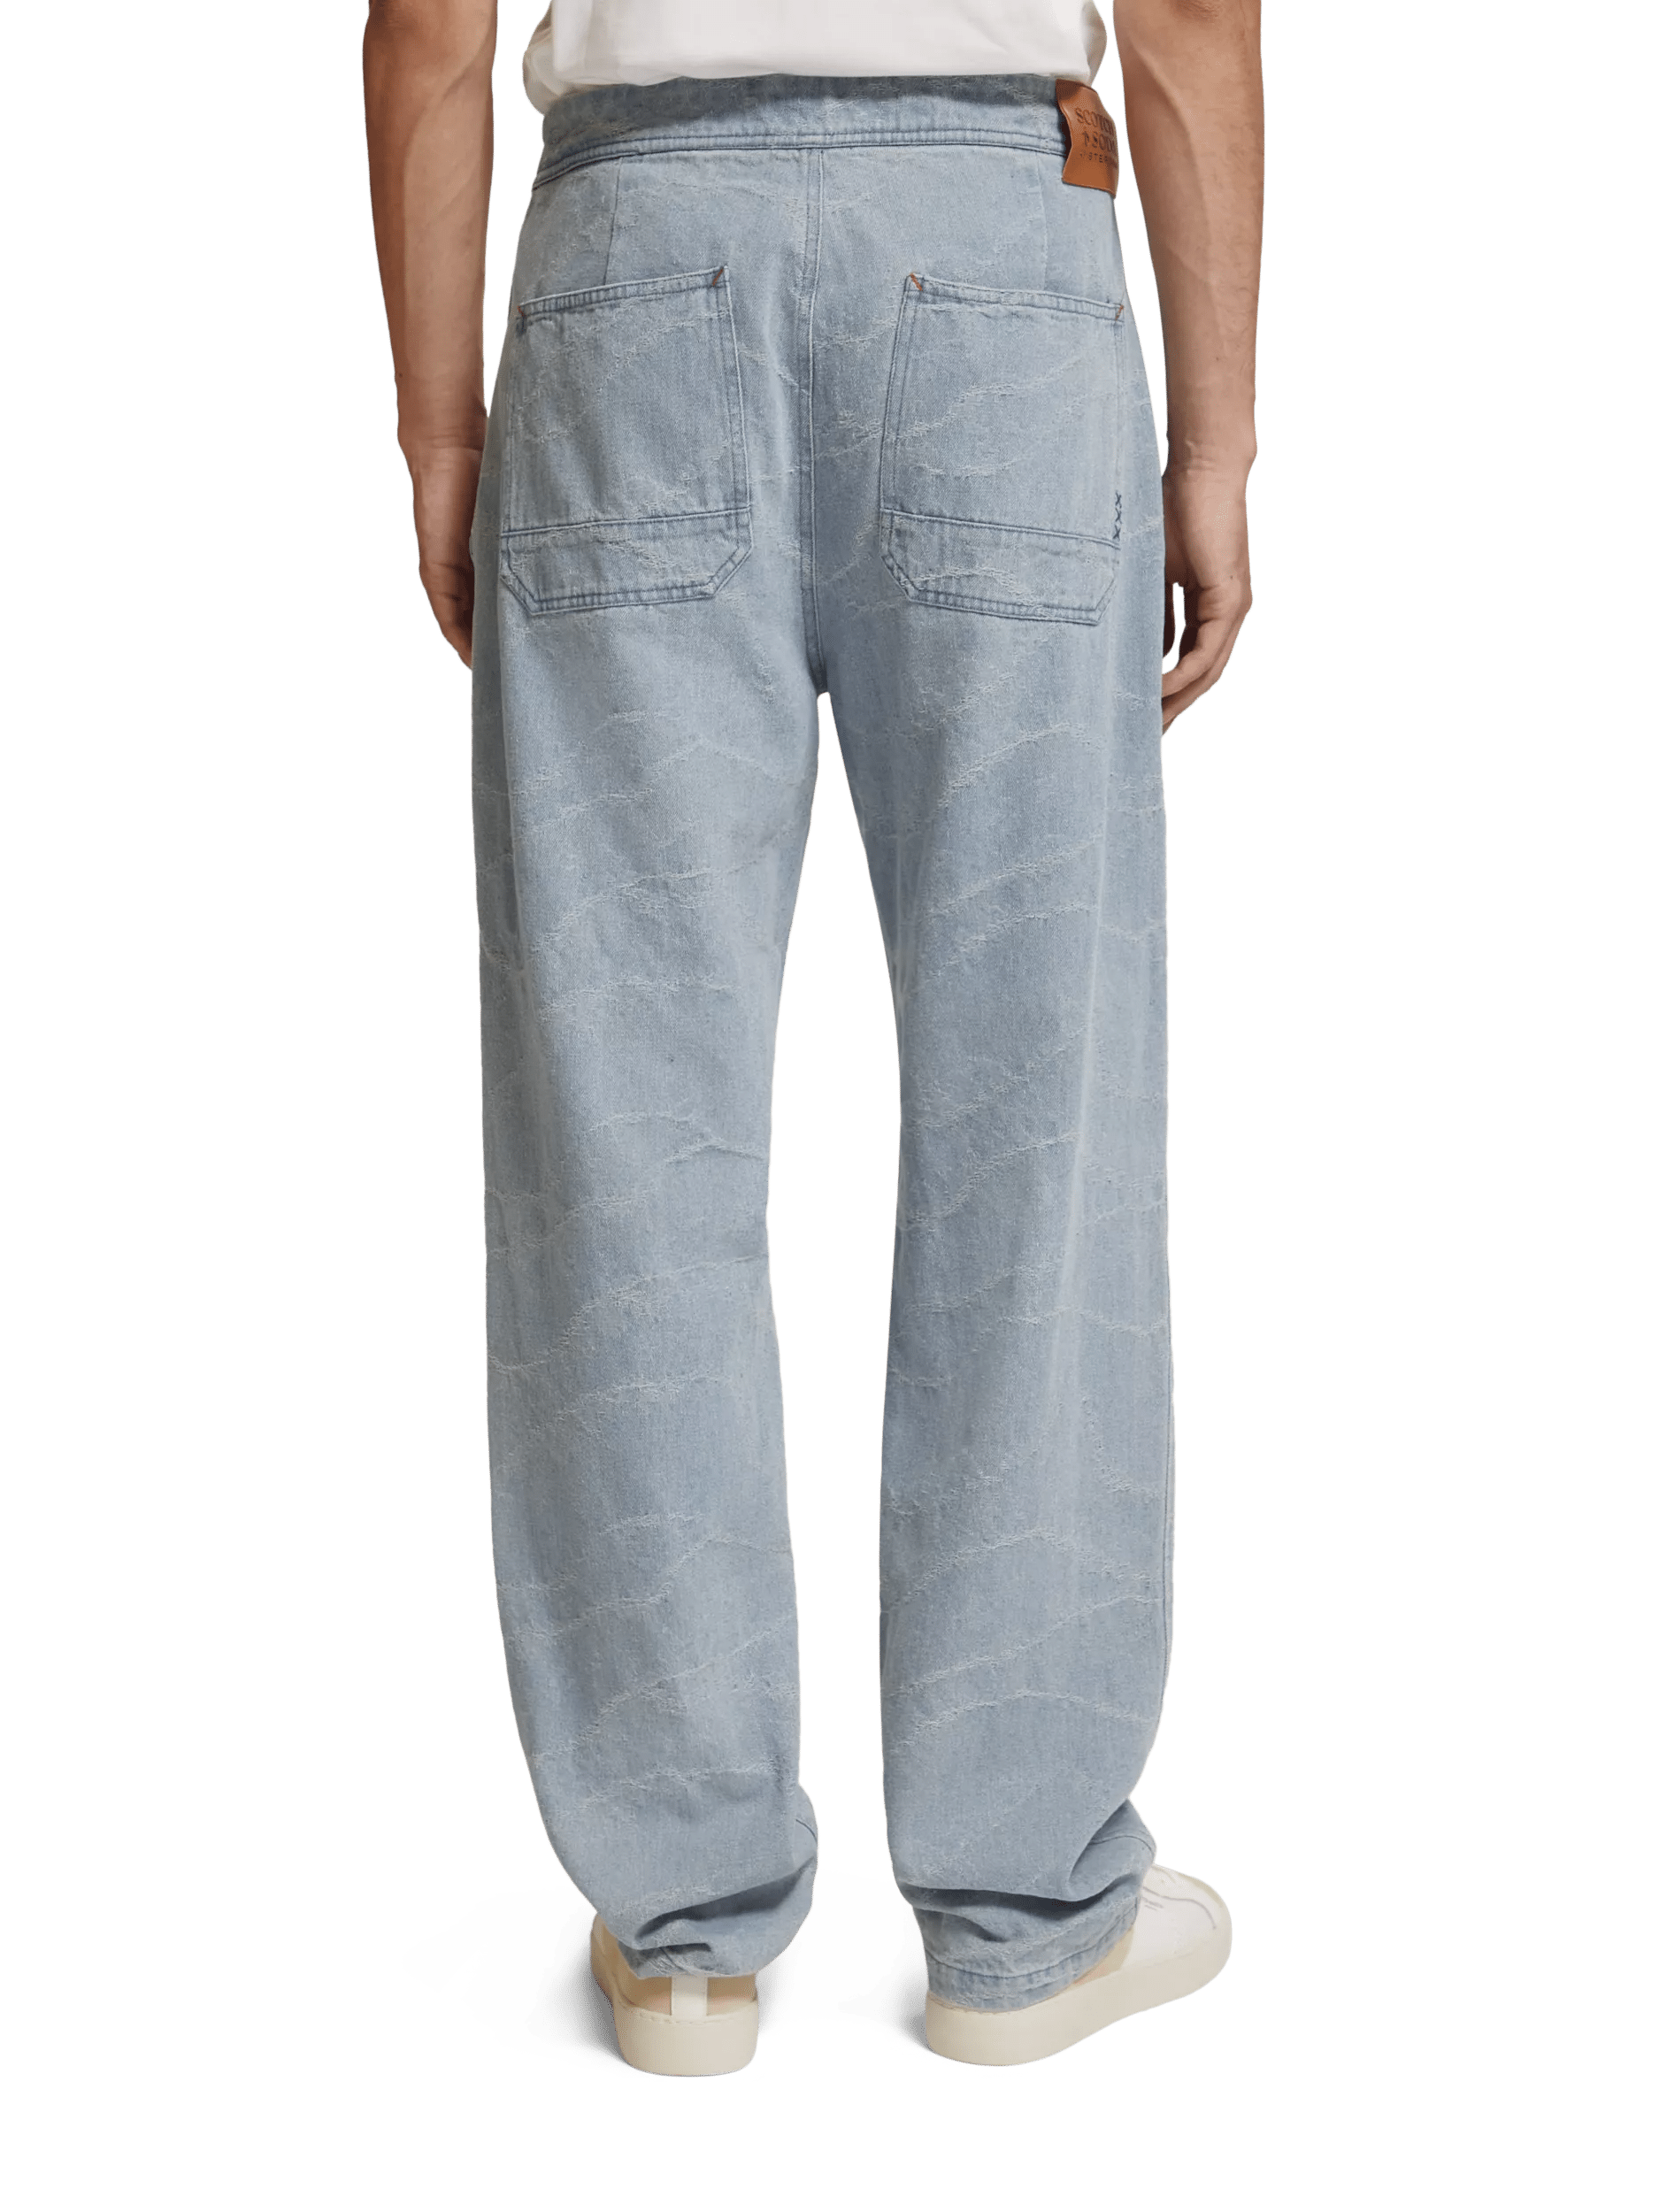 Scotch & Soda The Verve workwear utility trousers FIT-BCK